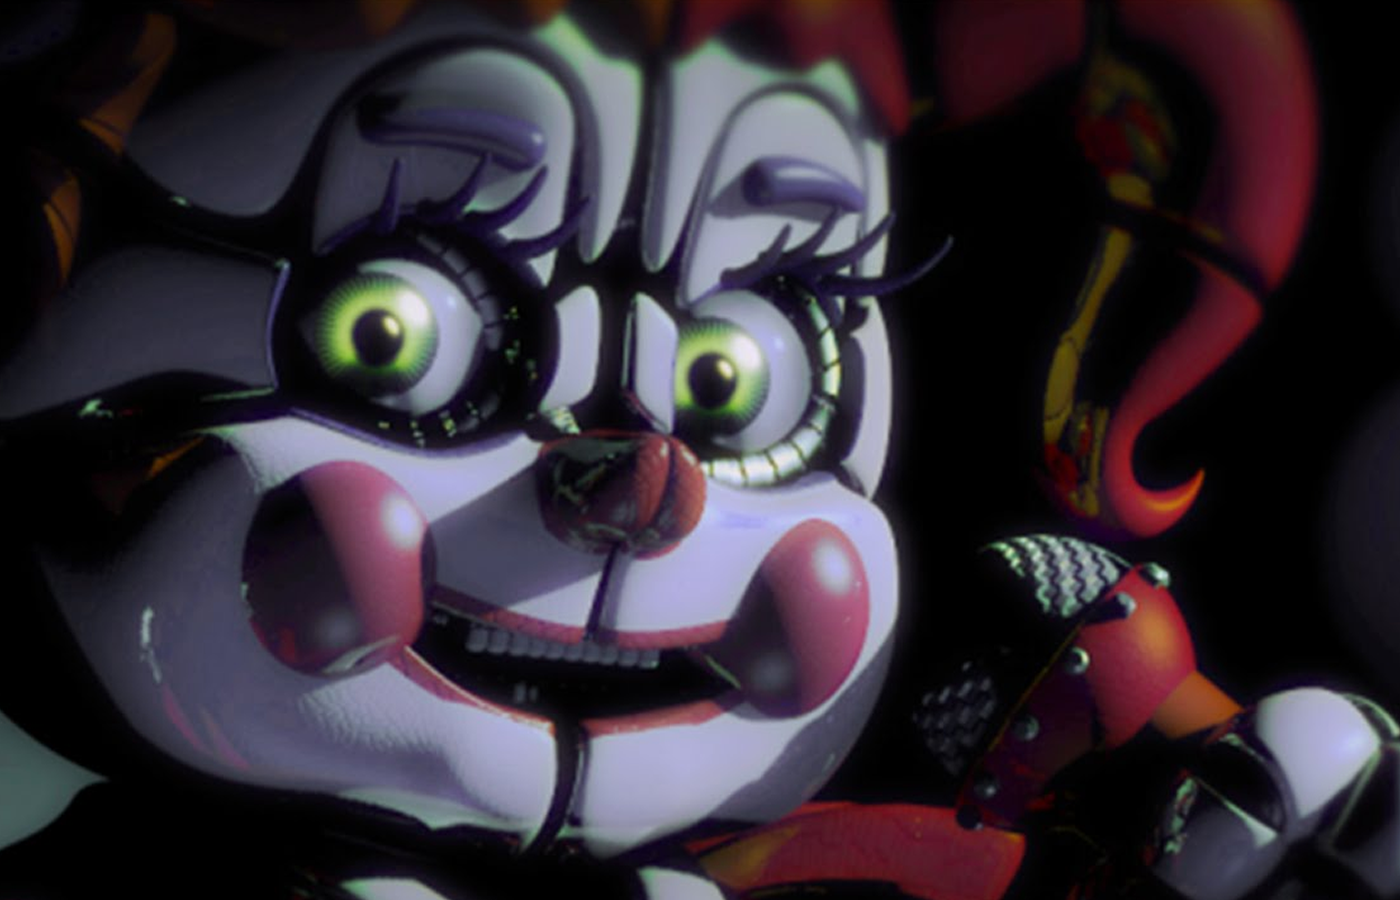 Five Nights at Freddy's: Sister Location "Too Dark" To Release? - Gameranx